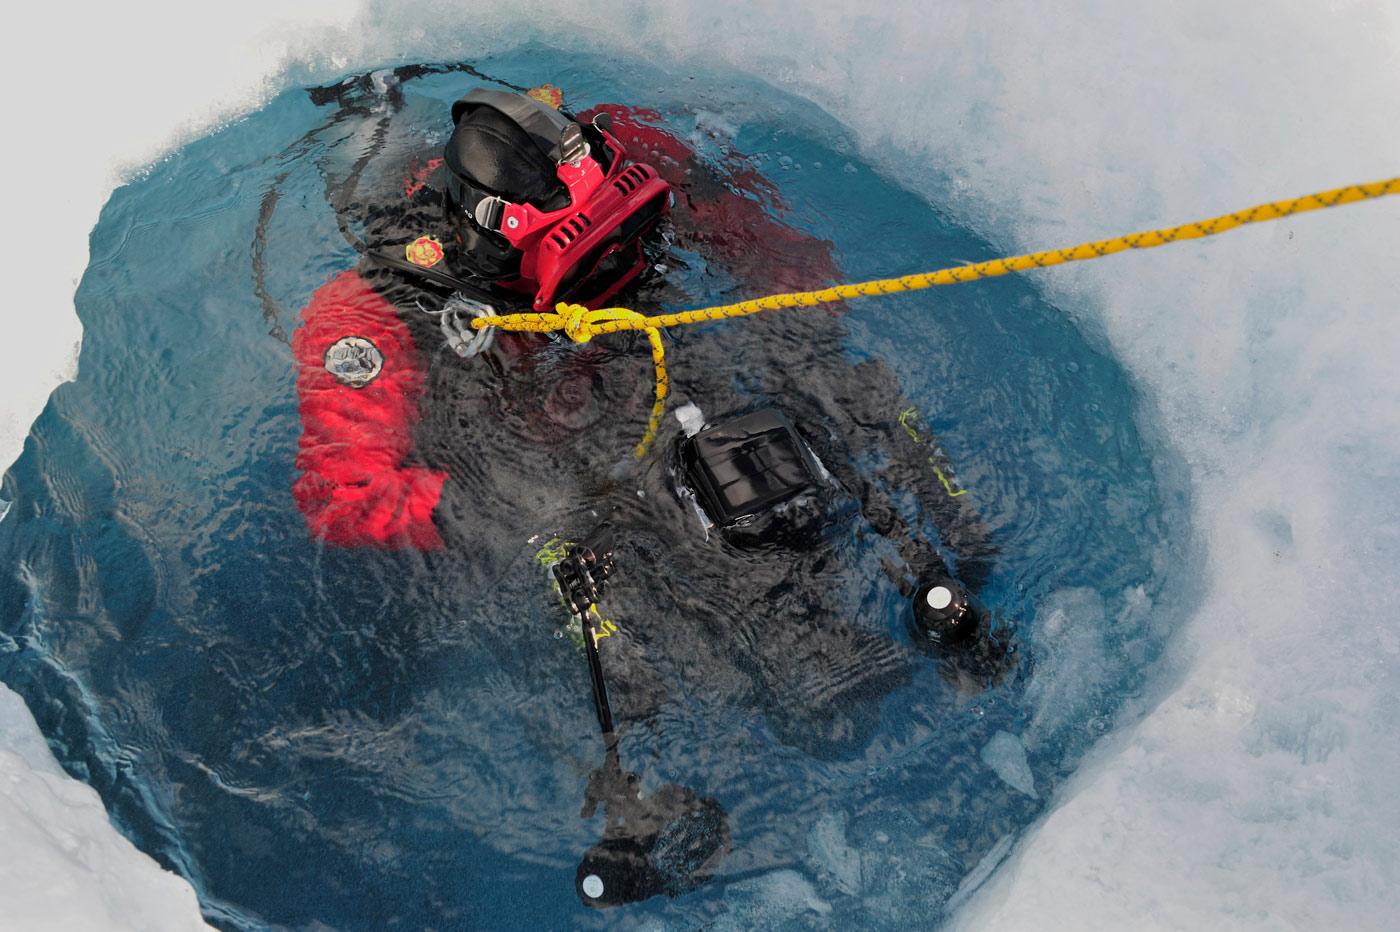 Dale Andersen going into the icy water in Antarctica